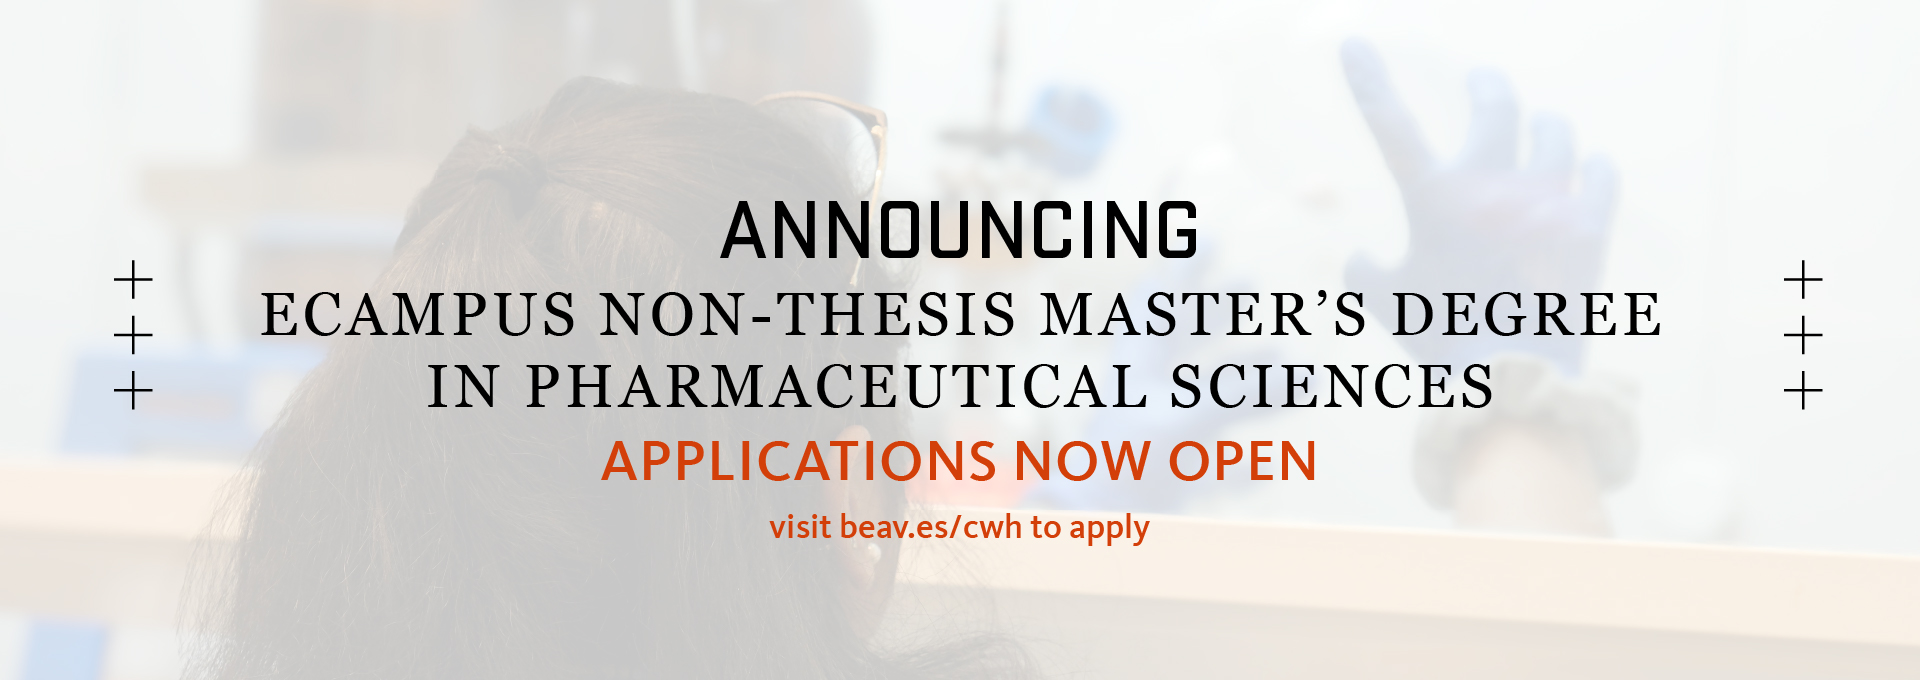 Announcing Ecampus non-thesis master's degree in pharmaceutical sciences. Applications now open